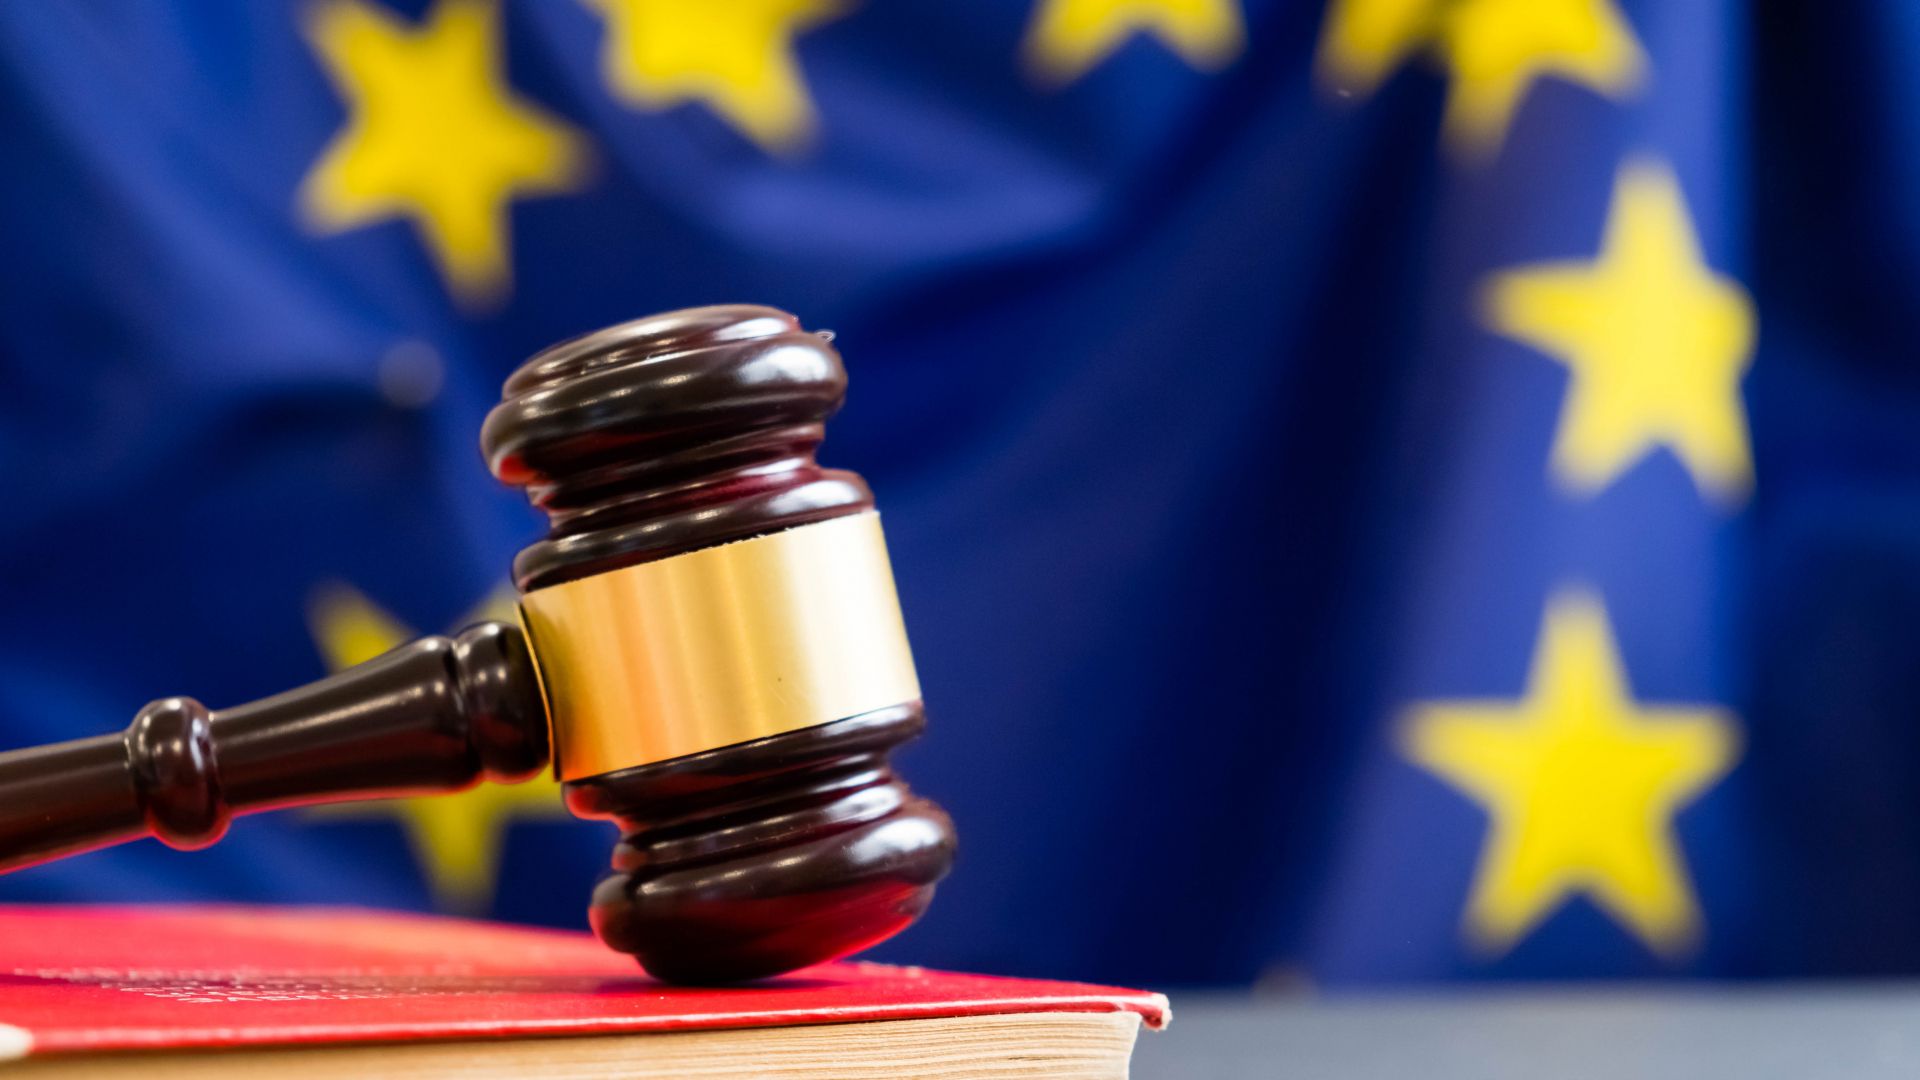 A gavel resting on a legal text in front of an EU flag